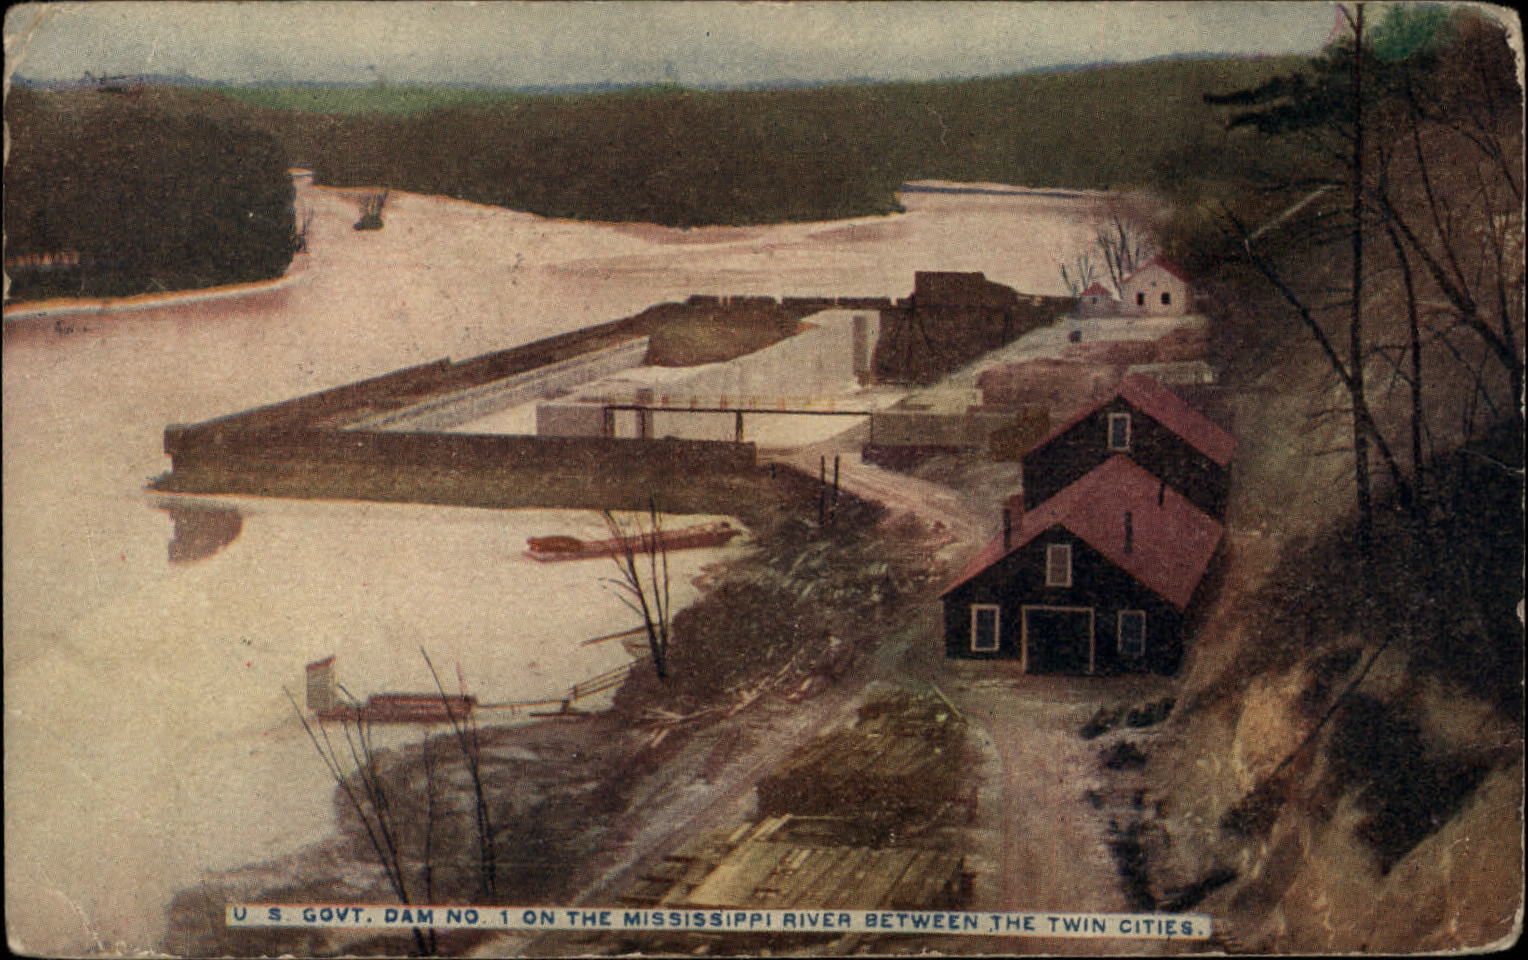 Government Dam Mississippi River between Twin Cities Minnesota ~ 1910 postcard